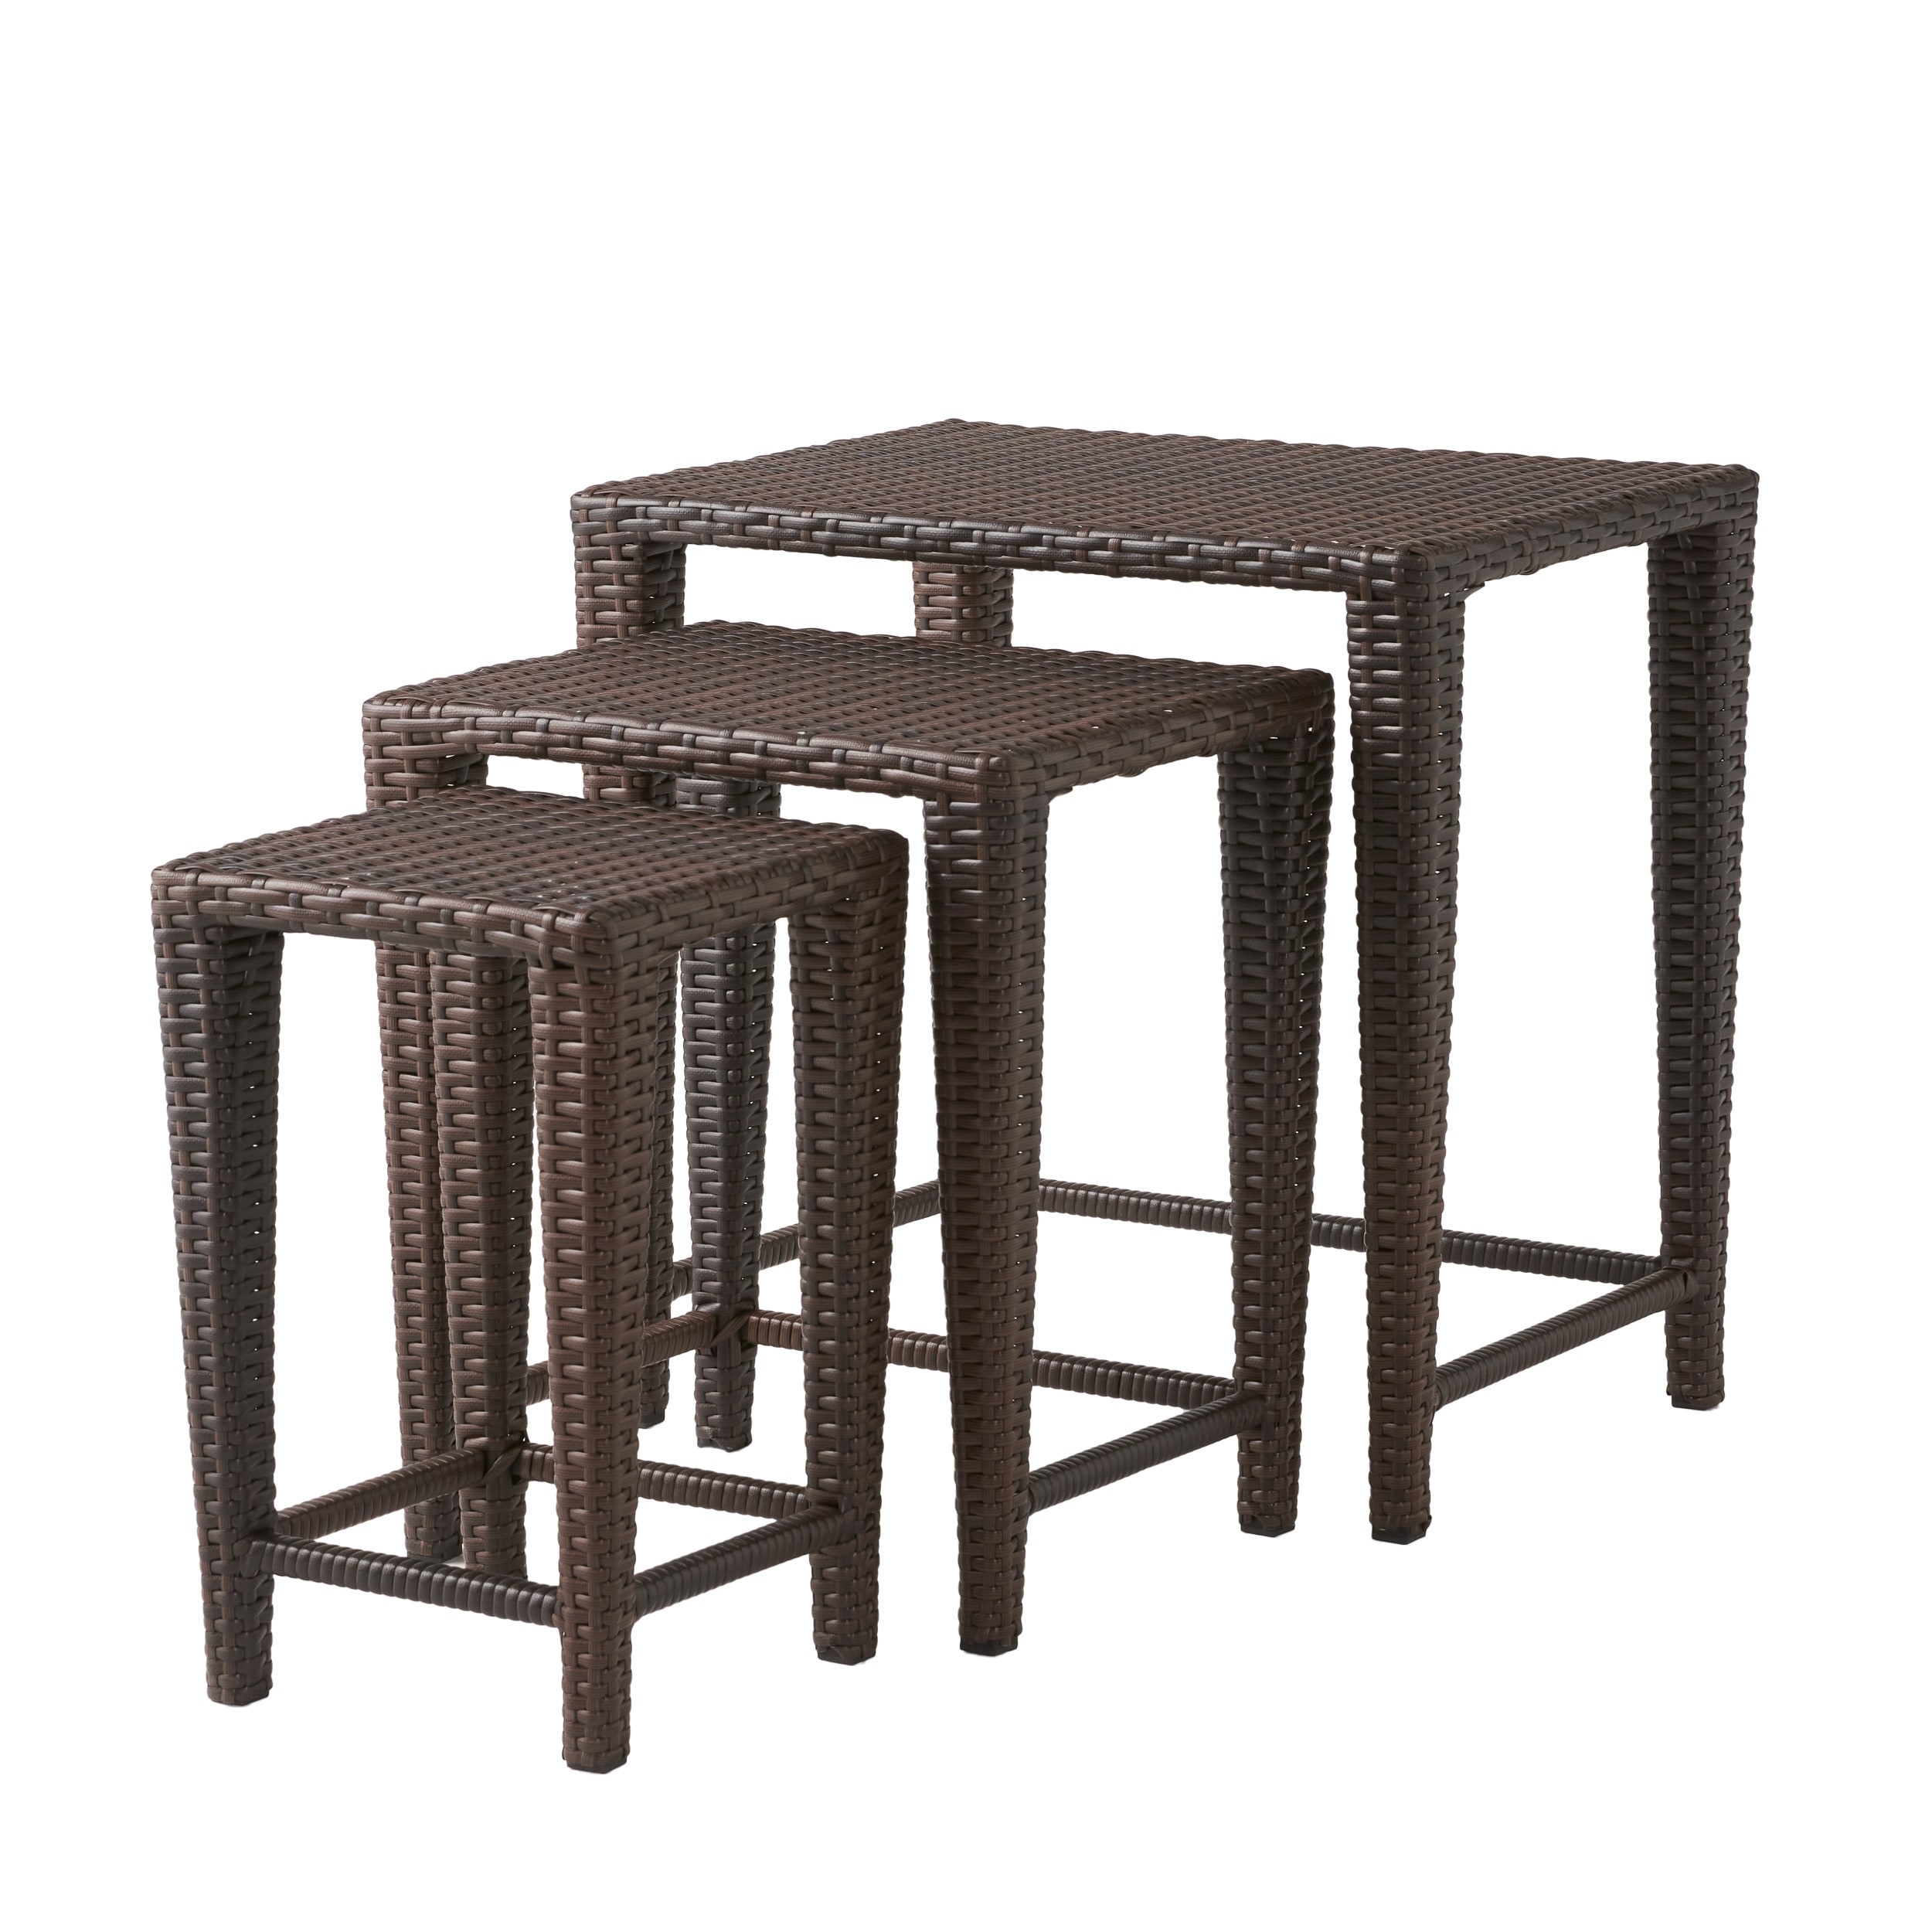 Wicker Multi-brown Nesting Tables - image 5 of 5